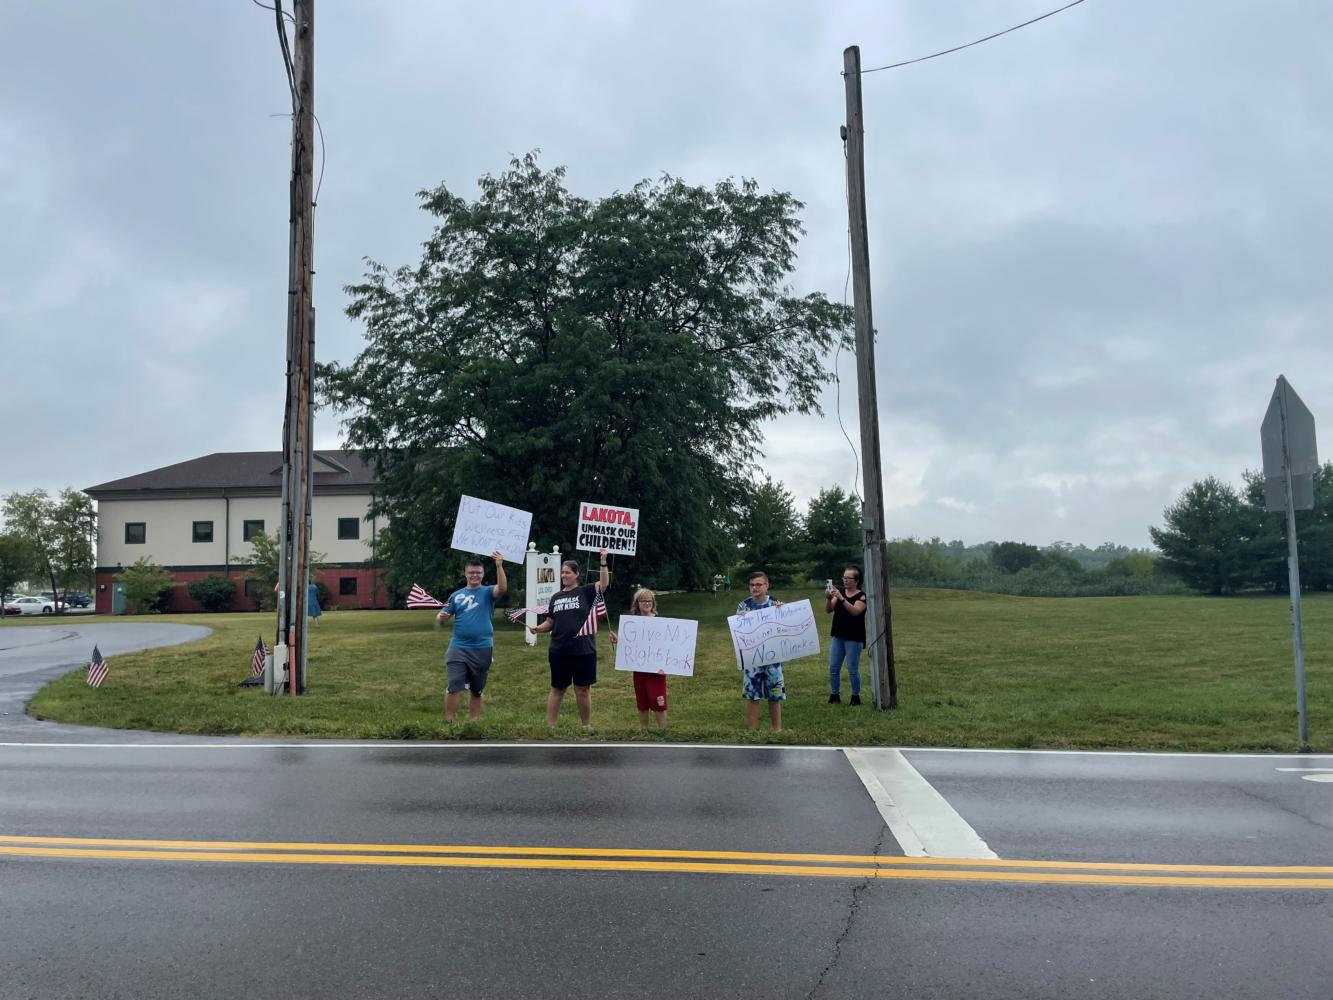 This Tues. Aug. 17, Lakota families gathered outside Lakota Local School District Offices to protest the recent announcement that students and staff are required to wear masks while in school for the upcoming school year. 
